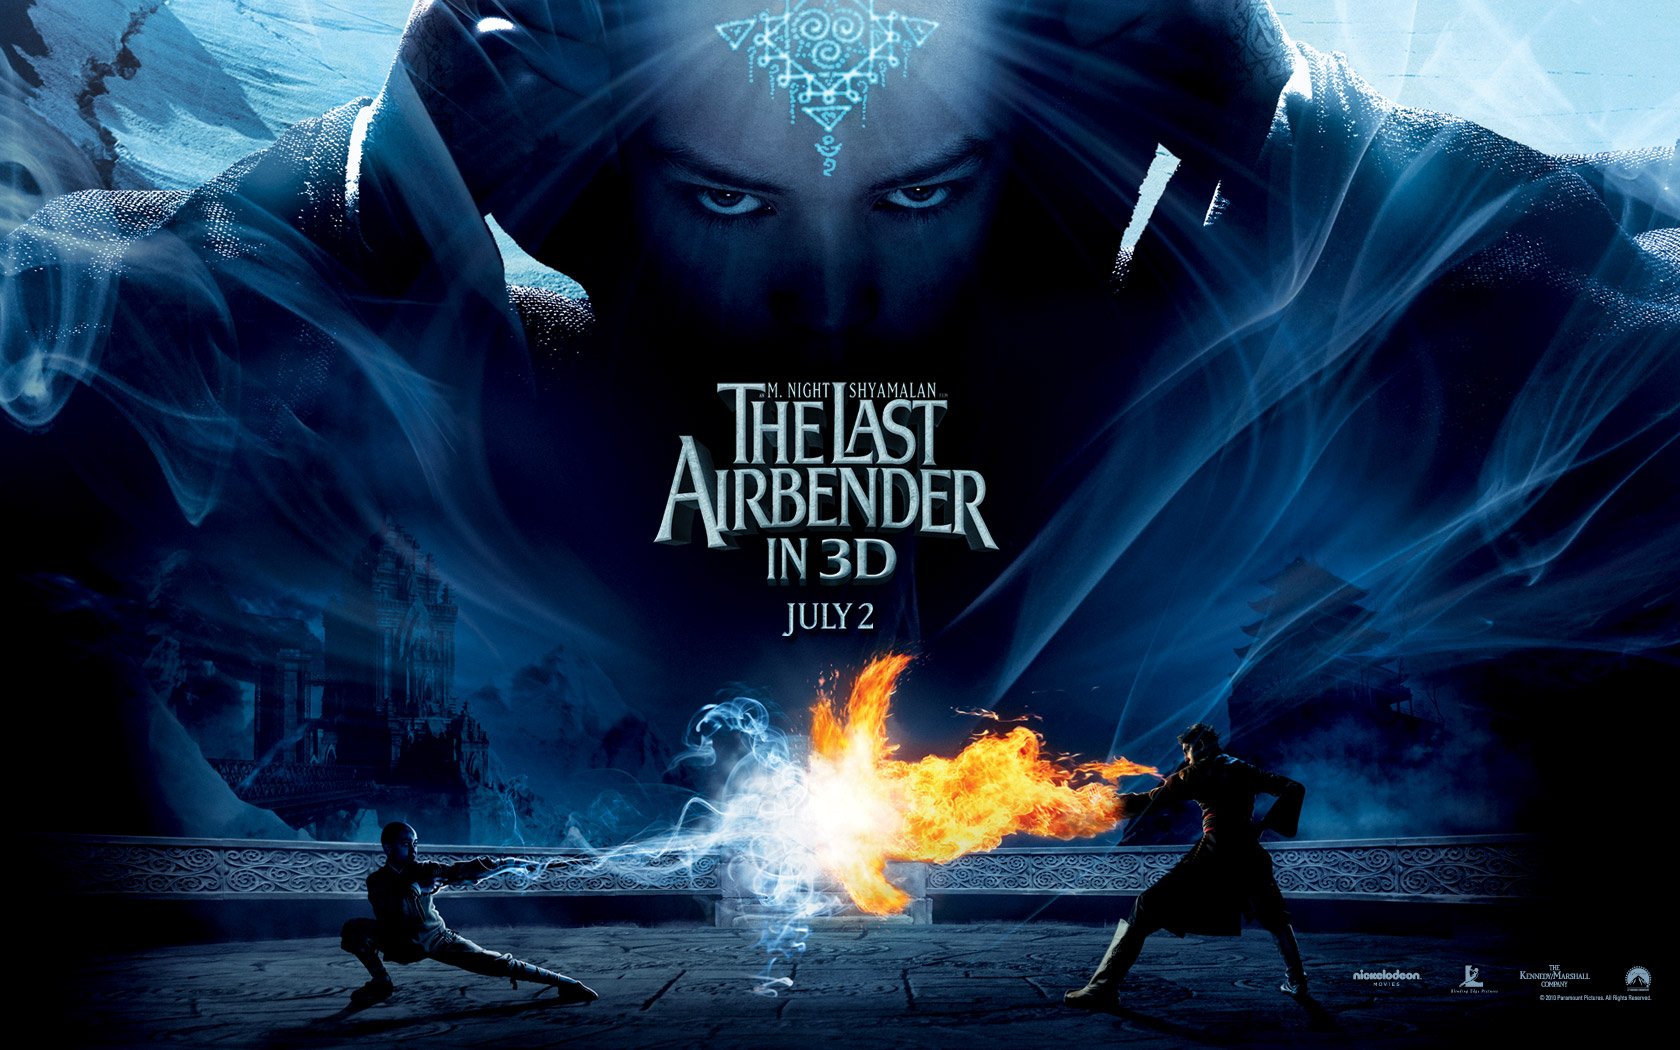 the last airbender wallpaper,action adventure game,movie,poster,cg artwork,games